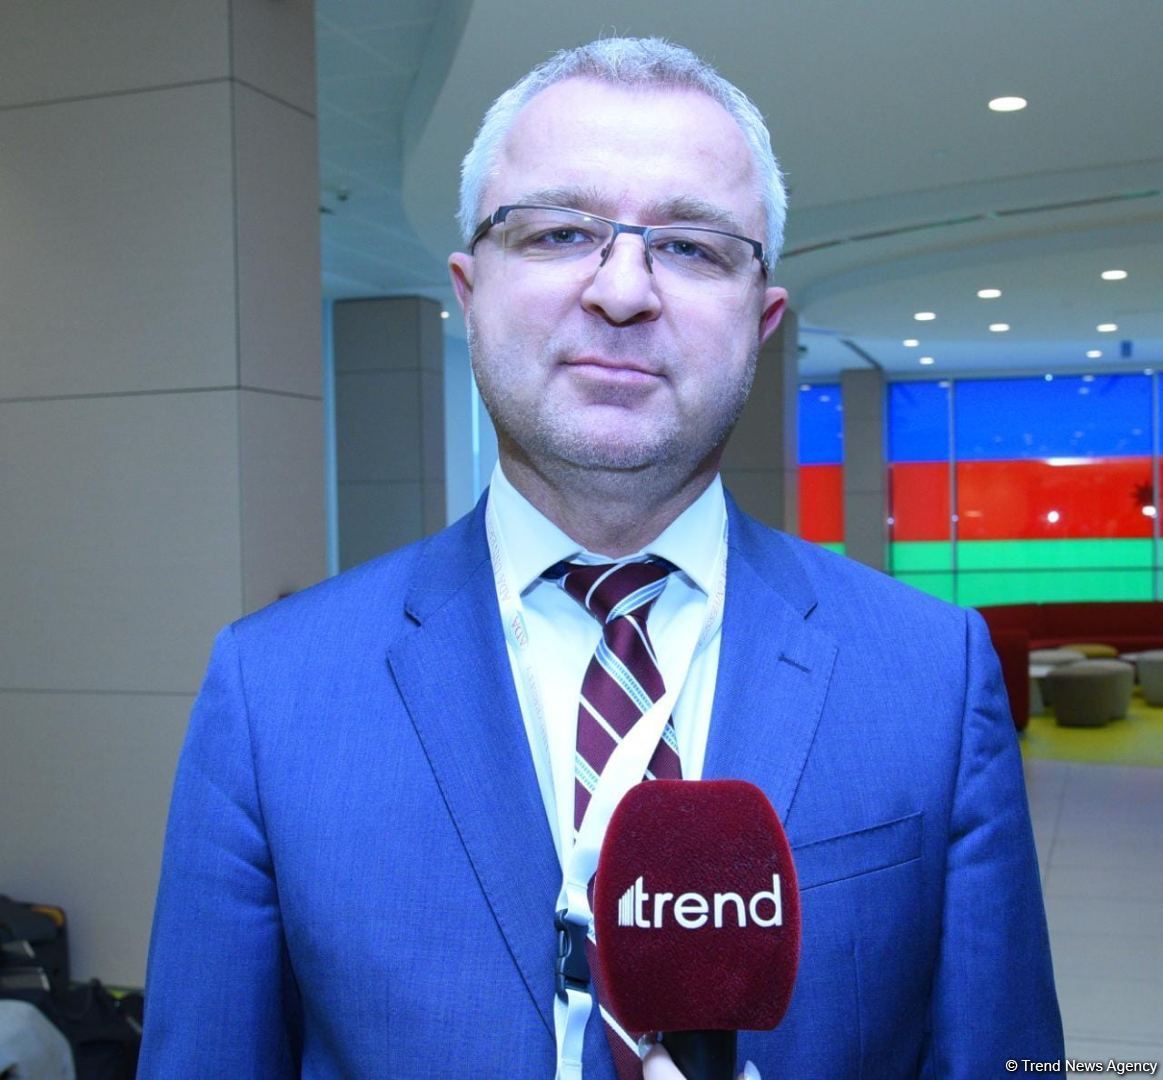 Azerbaijan's role on international arena steadily growing - Hungarian expert